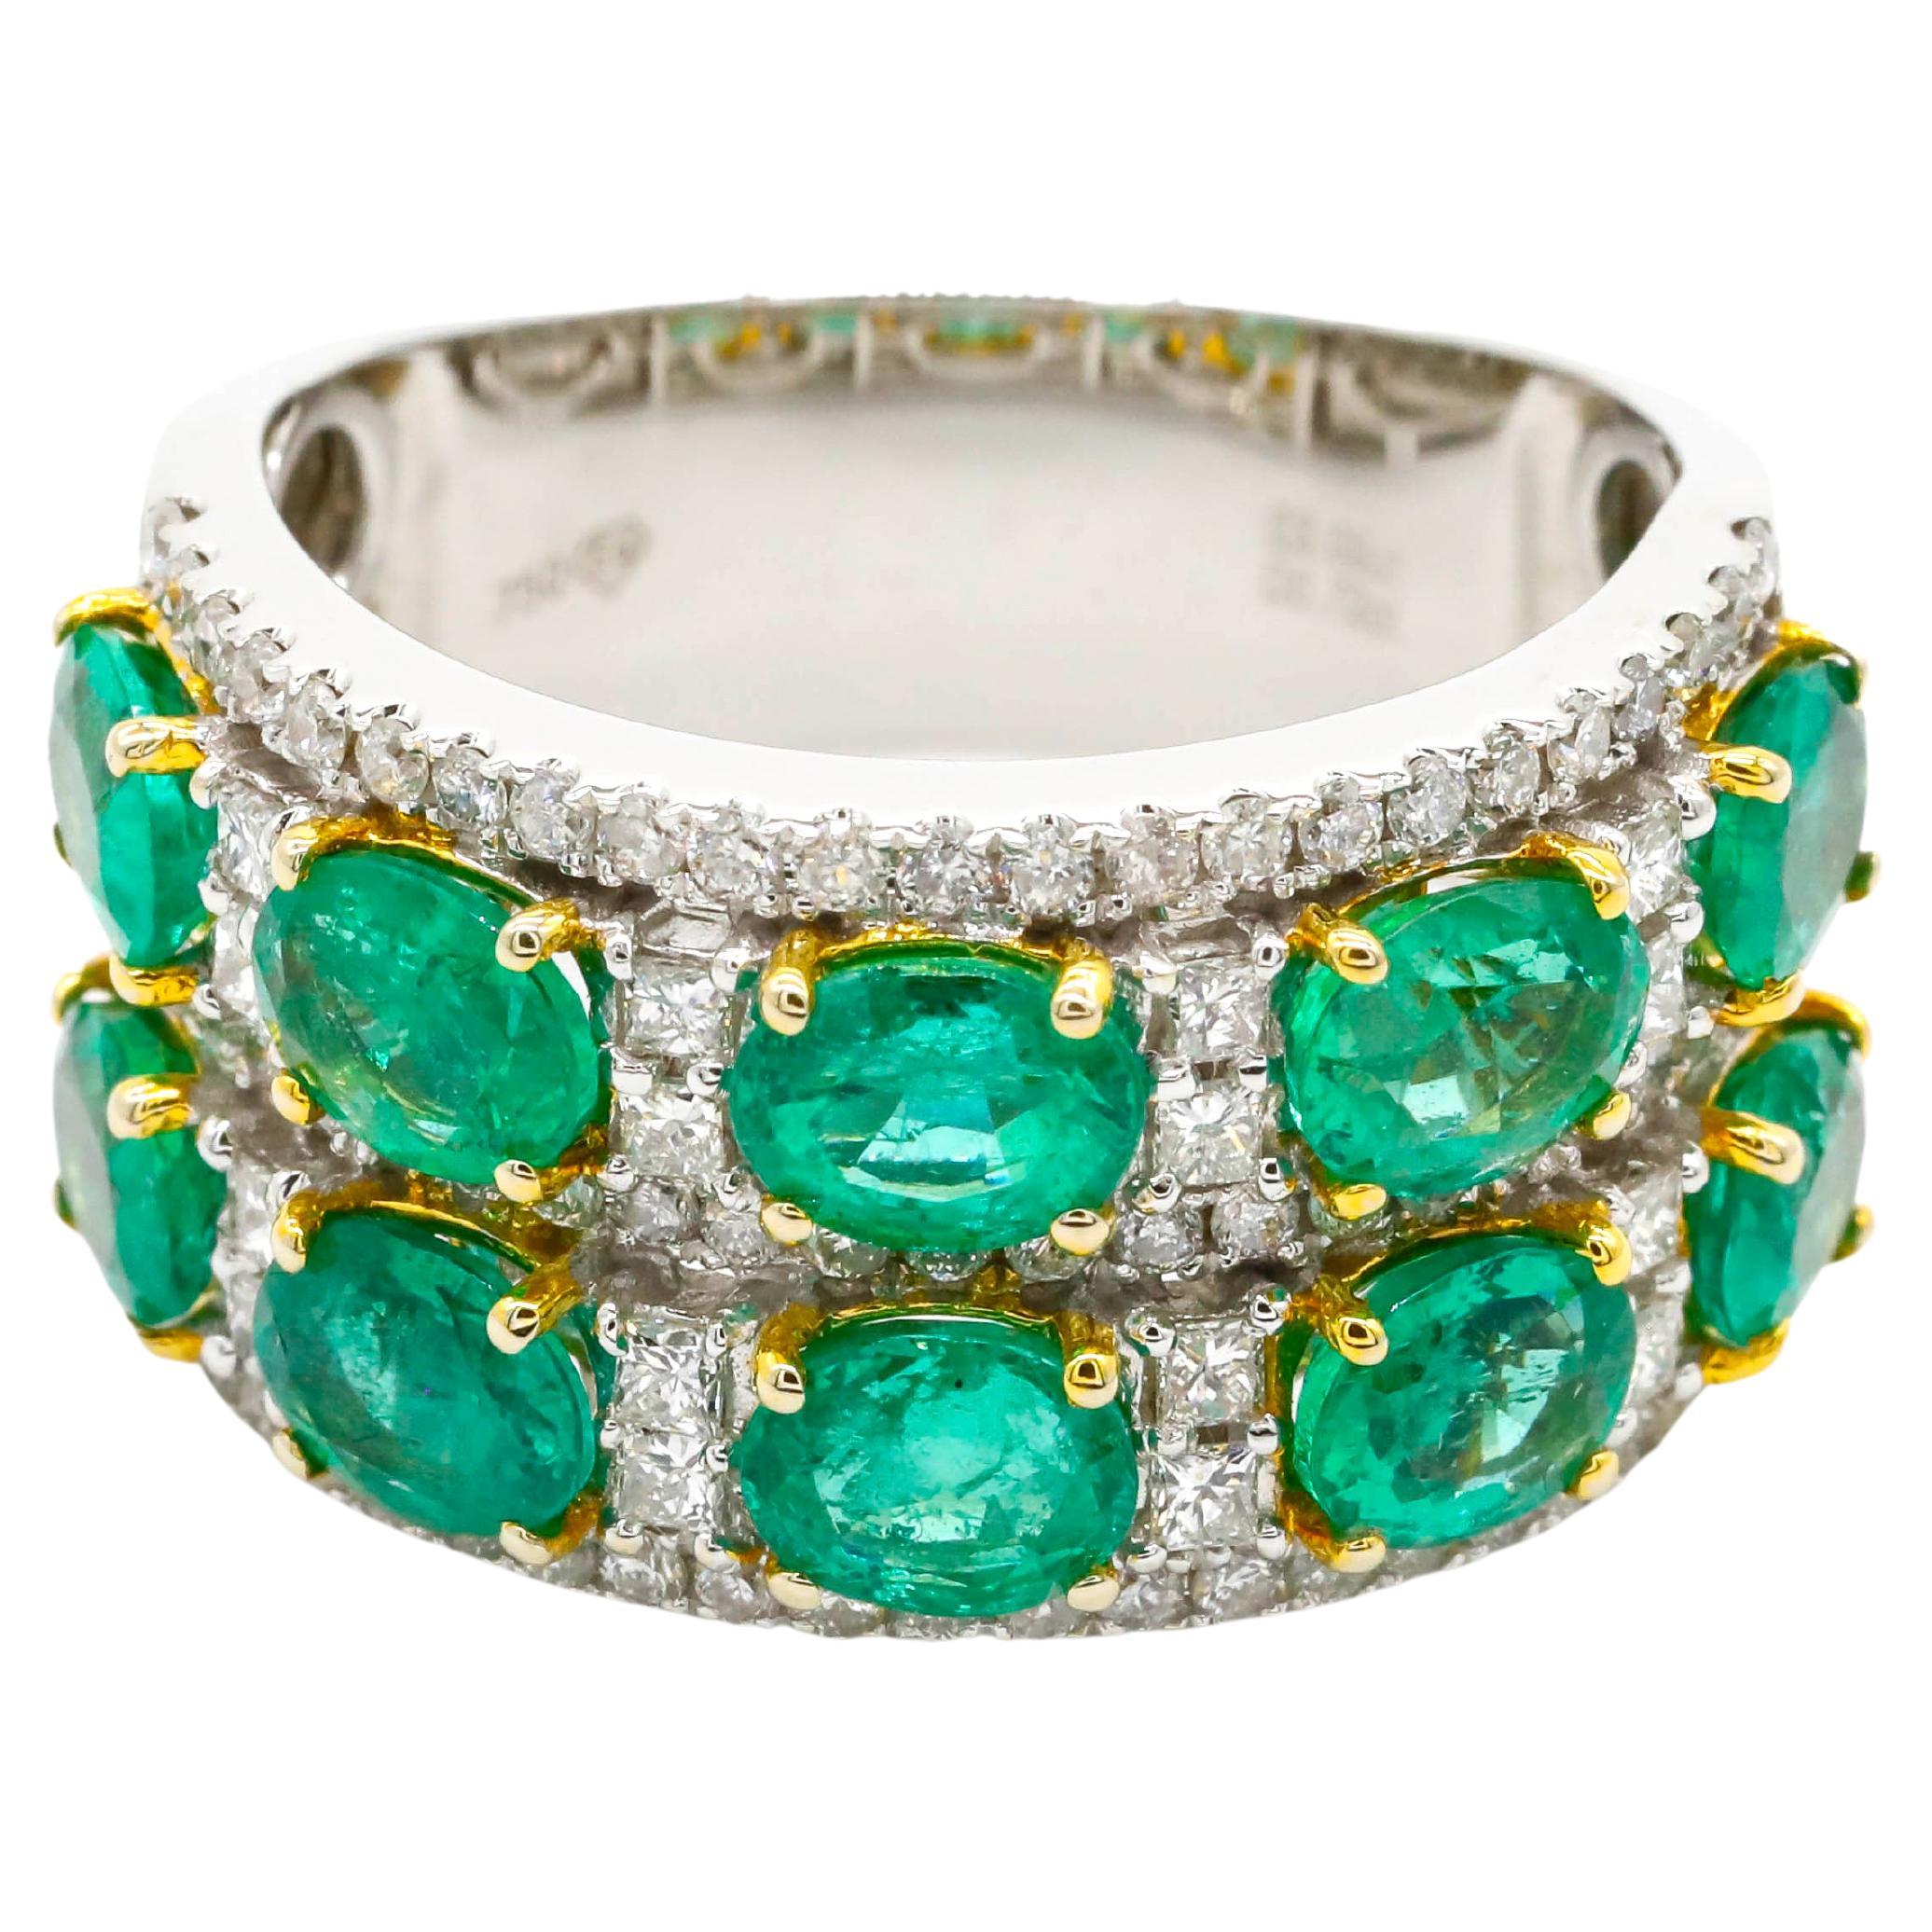 3.09 Carat Oval Cut Emerald and Round Diamond Band Ring in 18k Two-Tone Gold